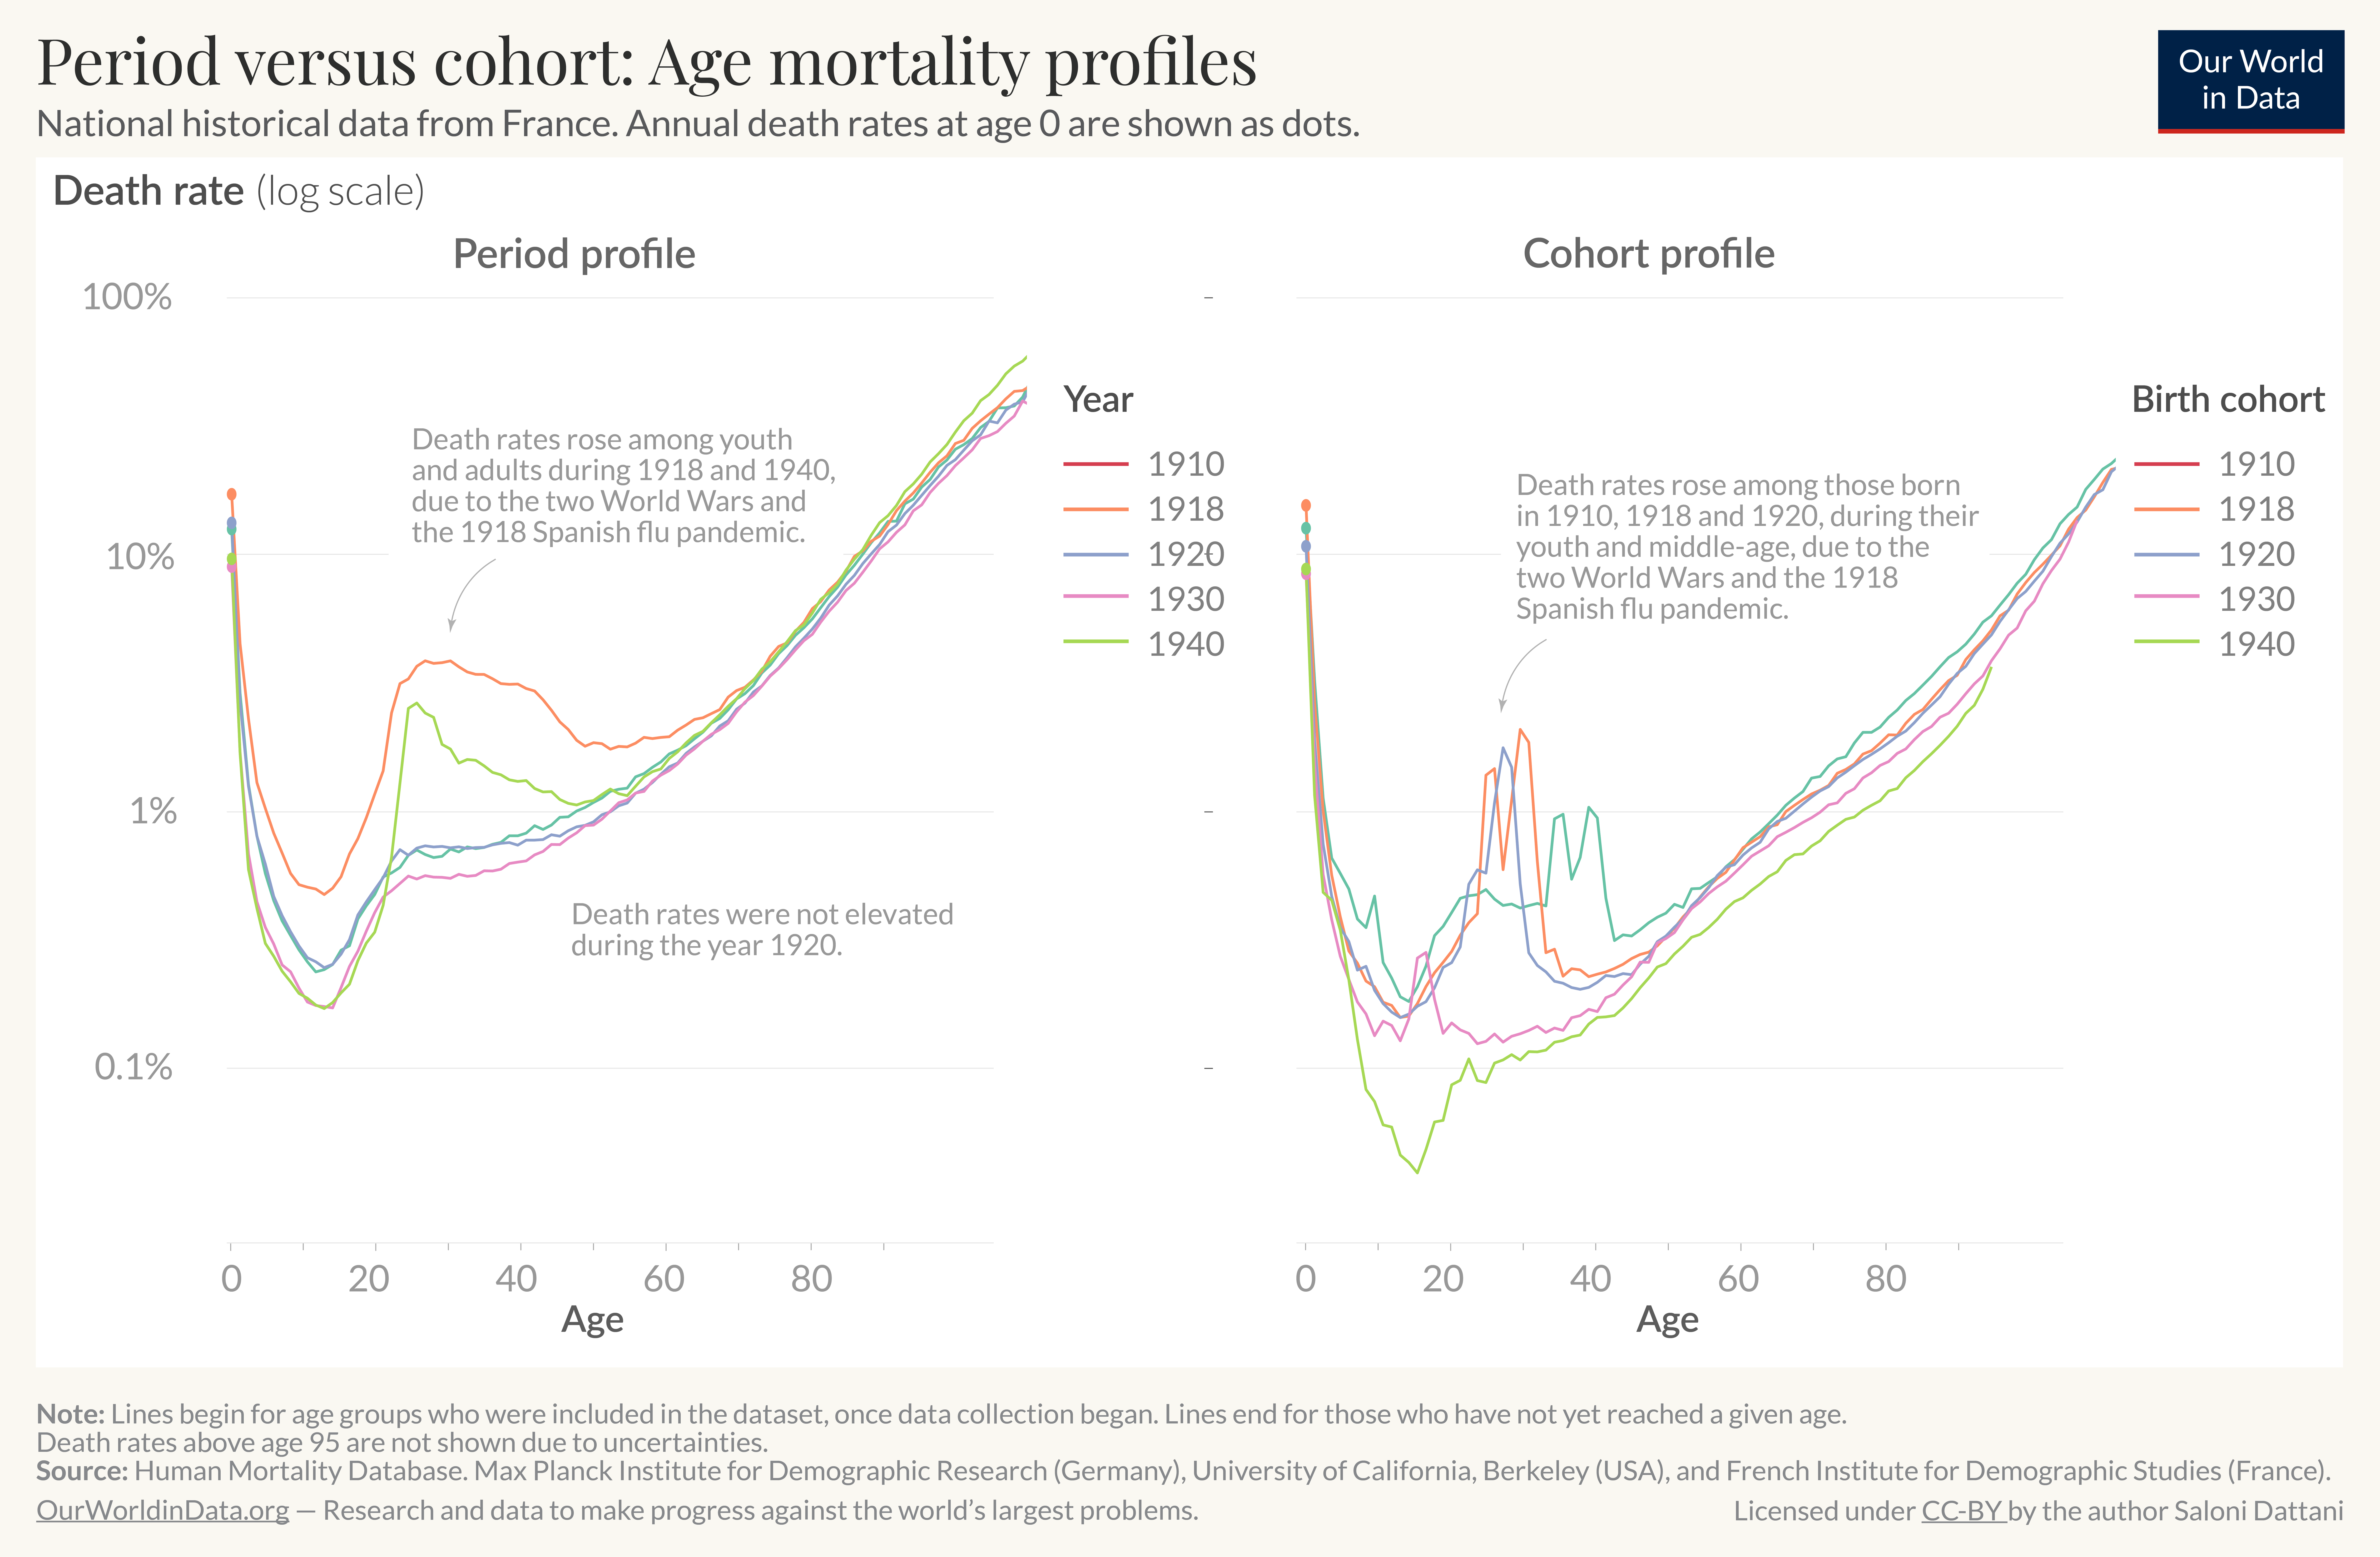 A comparison between period and cohort age-specific mortality rates, using national mortality data from France.